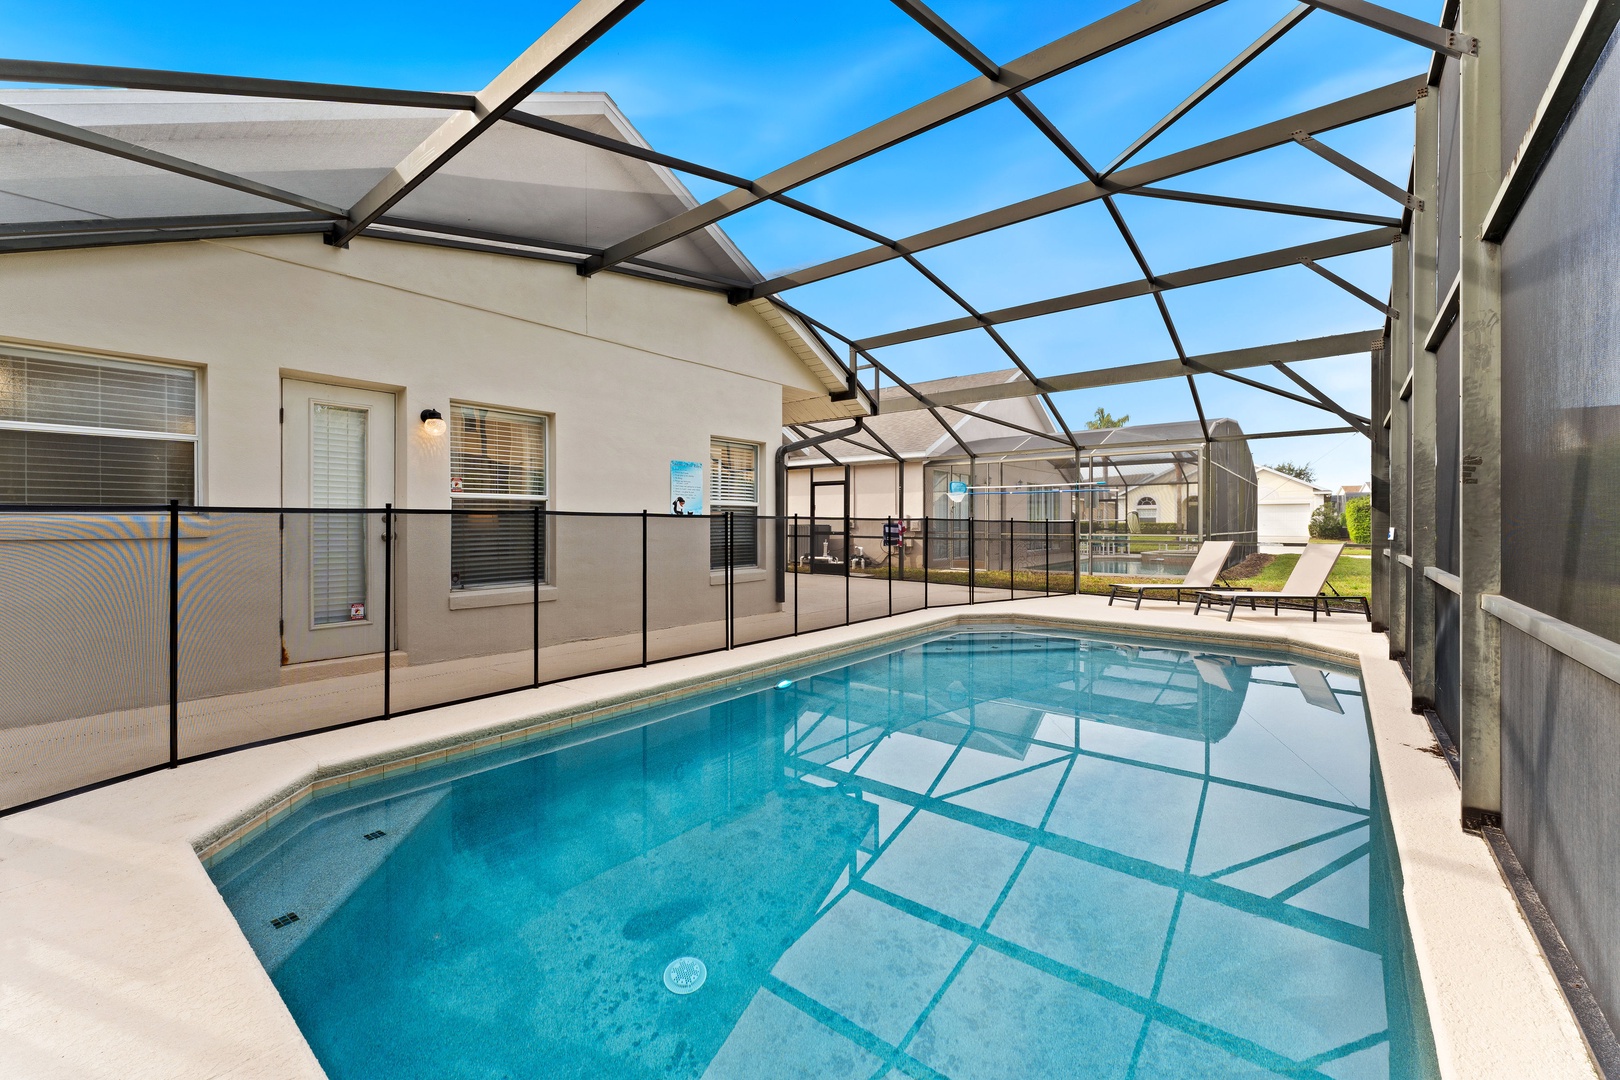 Lounge the day away or make a splash in your private pool!